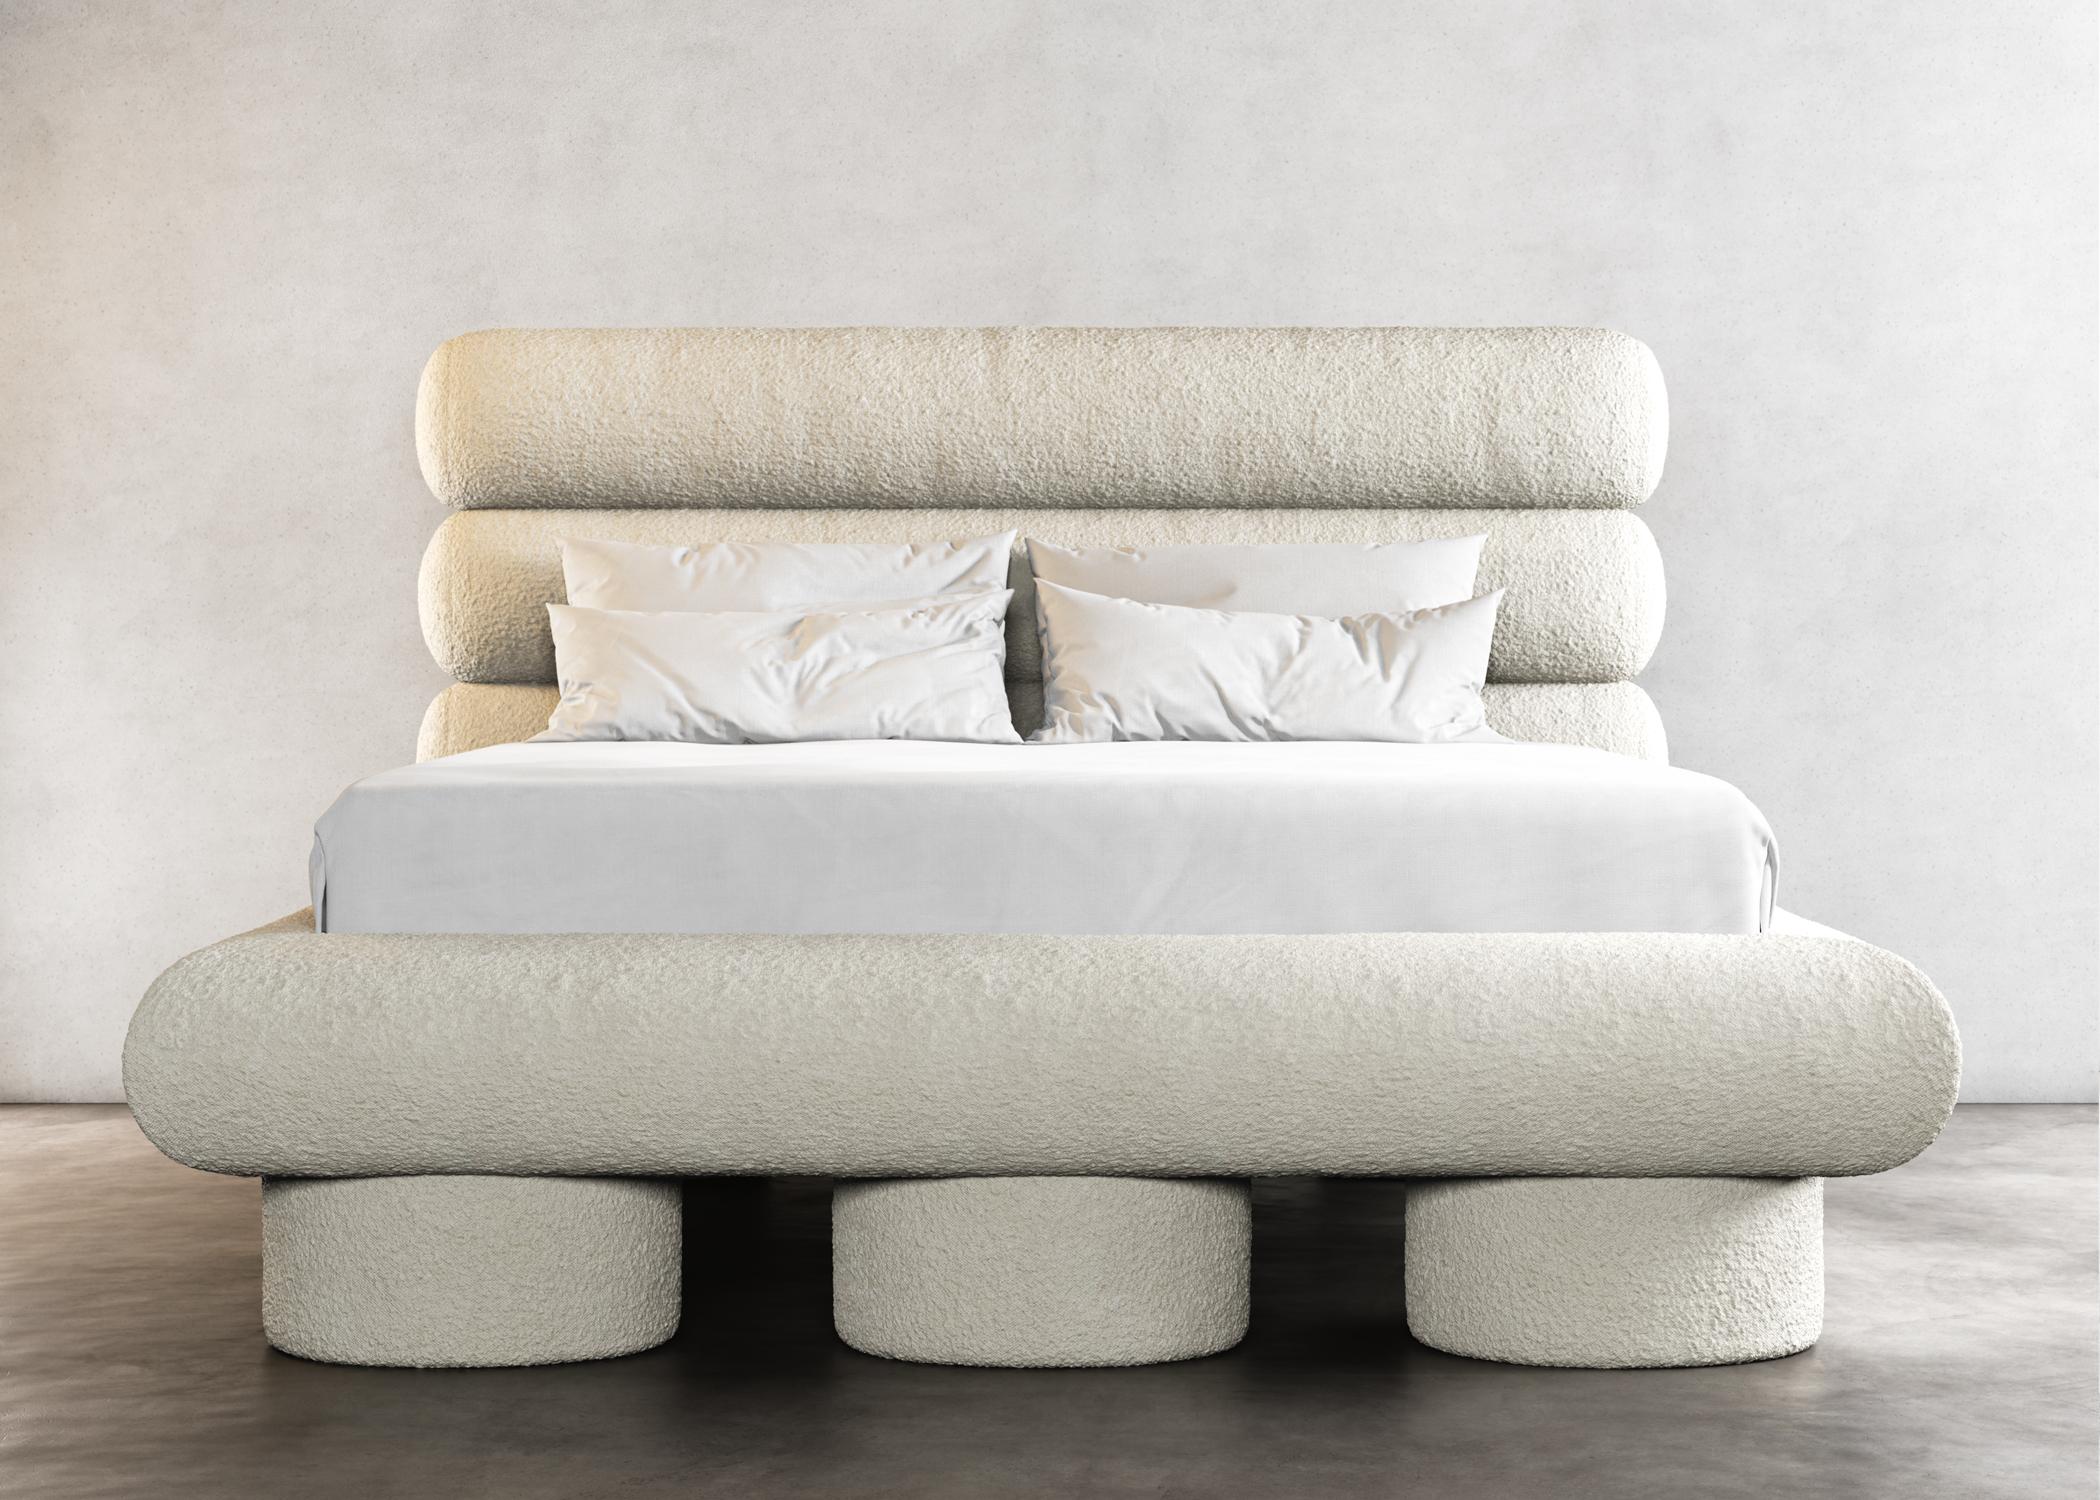 Our modern Dip Bed is the perfect addition to any contemporary bedroom.
Crafted from high-quality materials, this bed is not only stylish but also durable and long-lasting. The sleek and minimalist design features clean lines creating a chic and